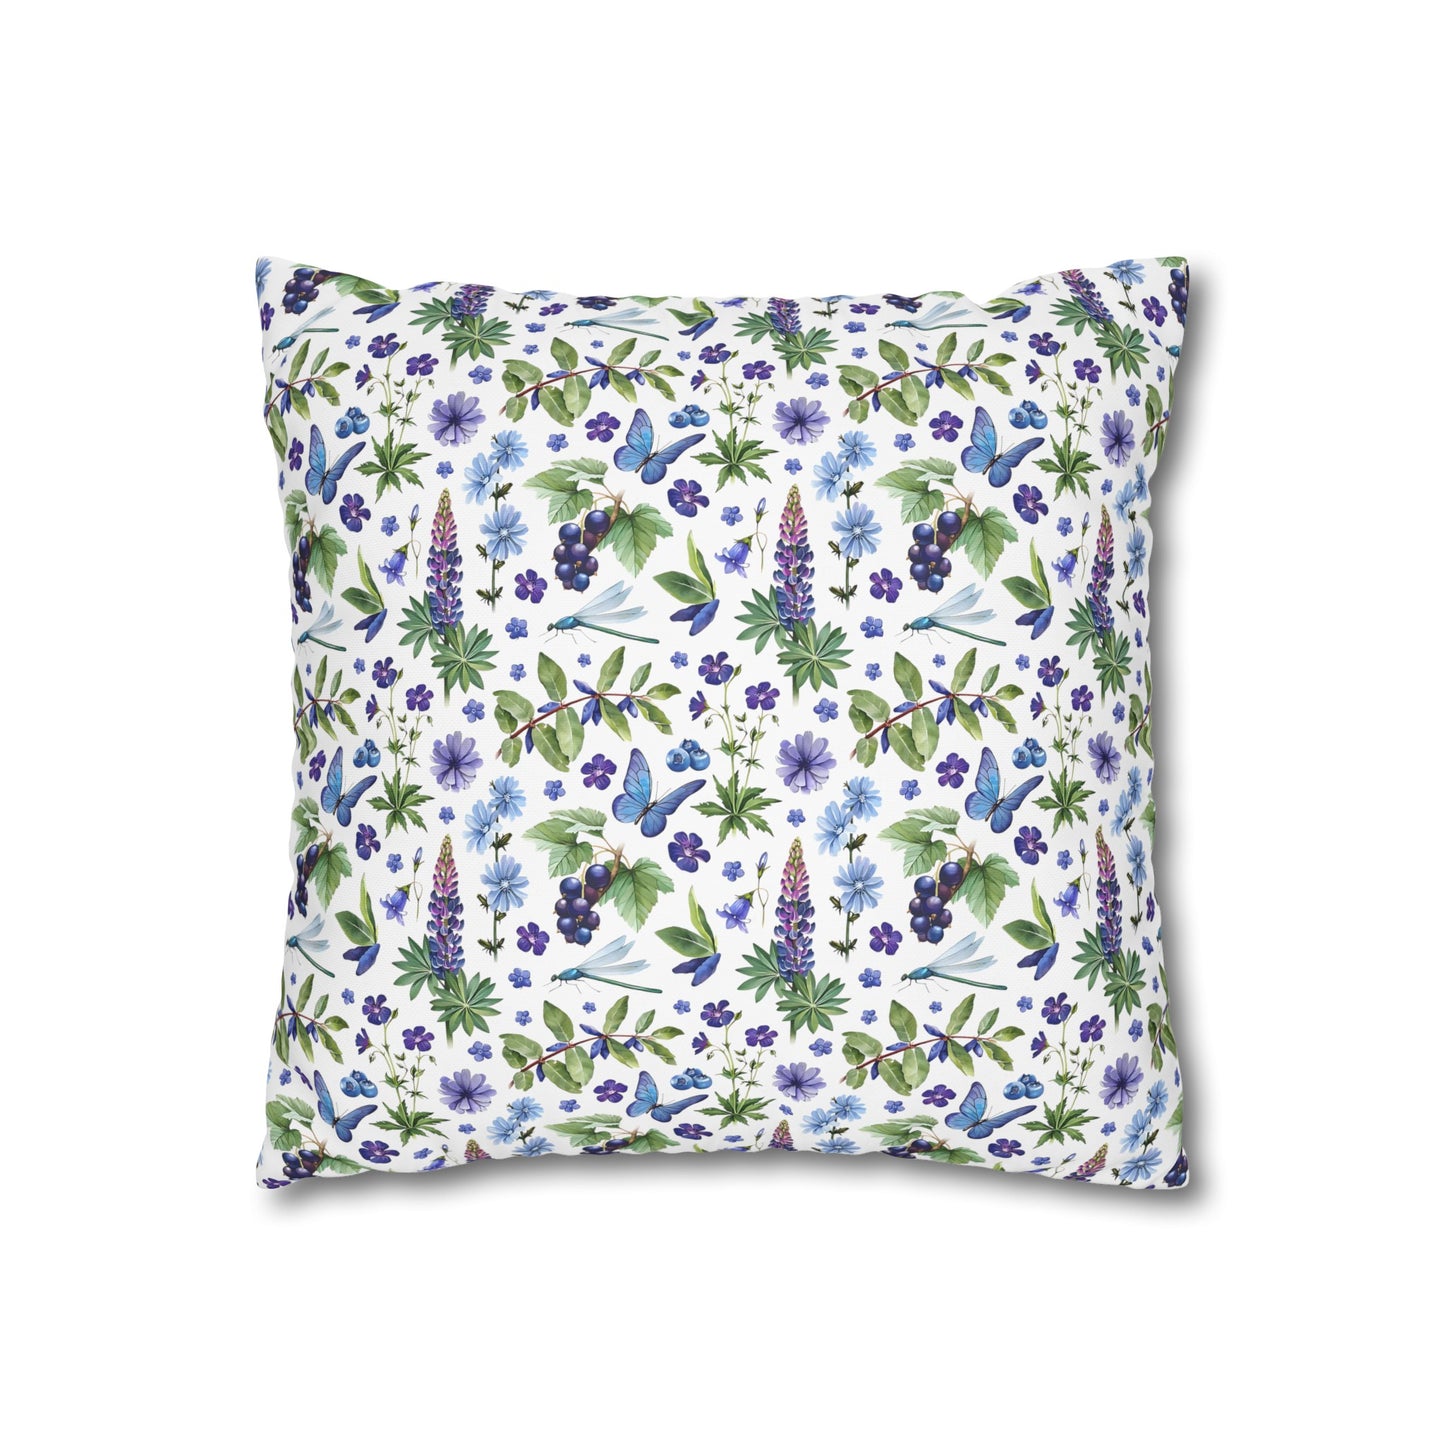 Blue Dragonfly #2 Cushion Cover